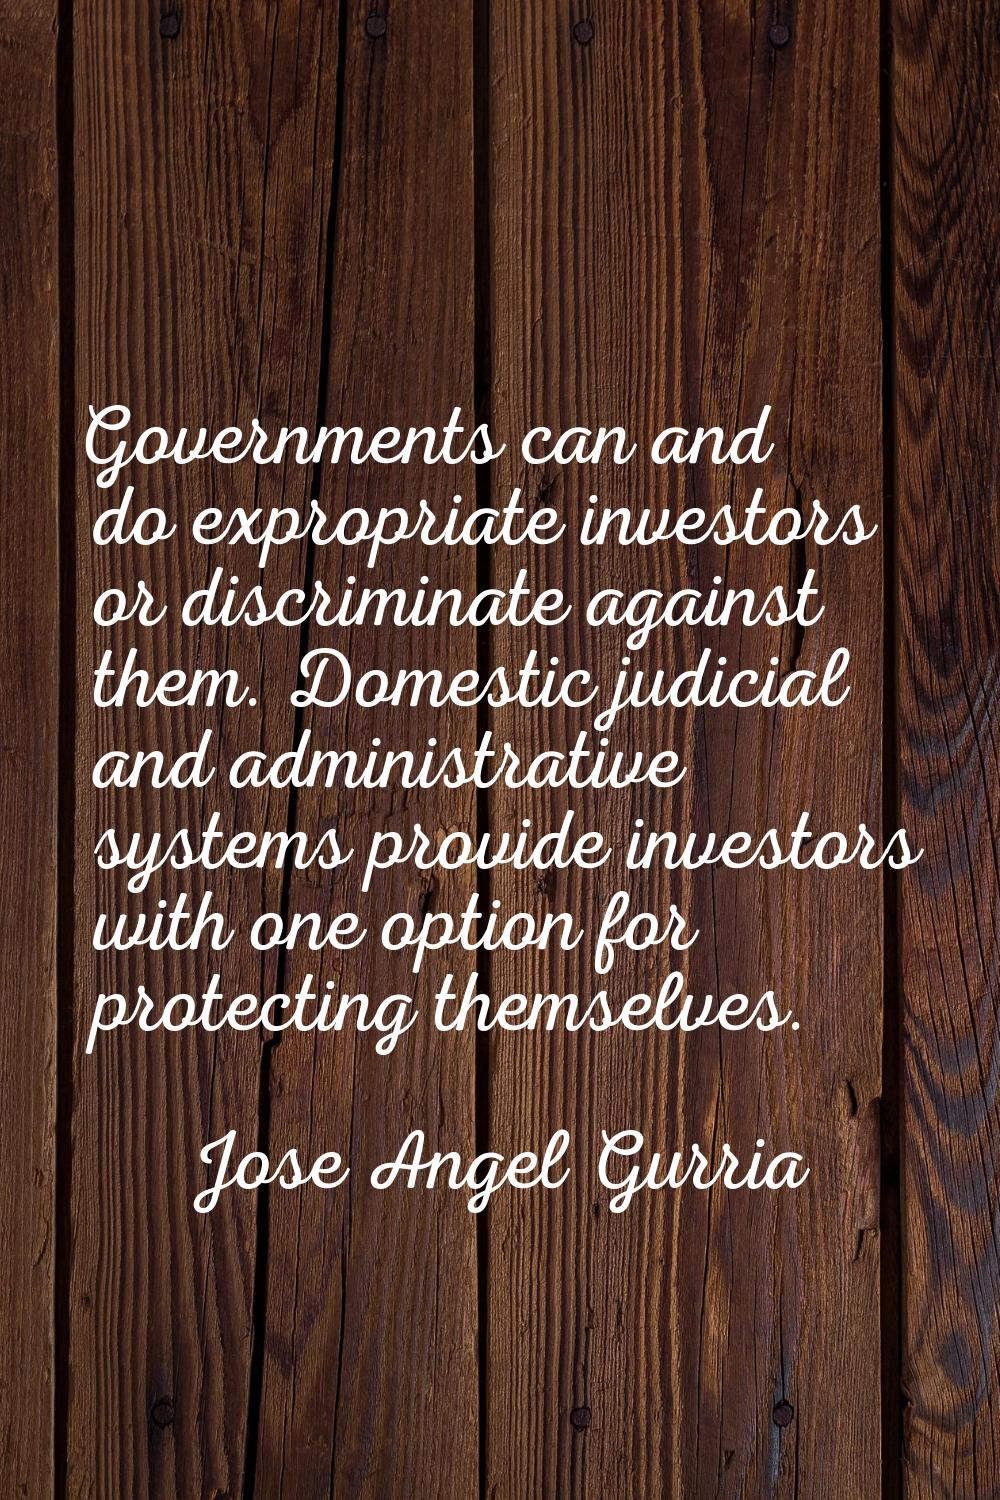 Governments can and do expropriate investors or discriminate against them. Domestic judicial and ad